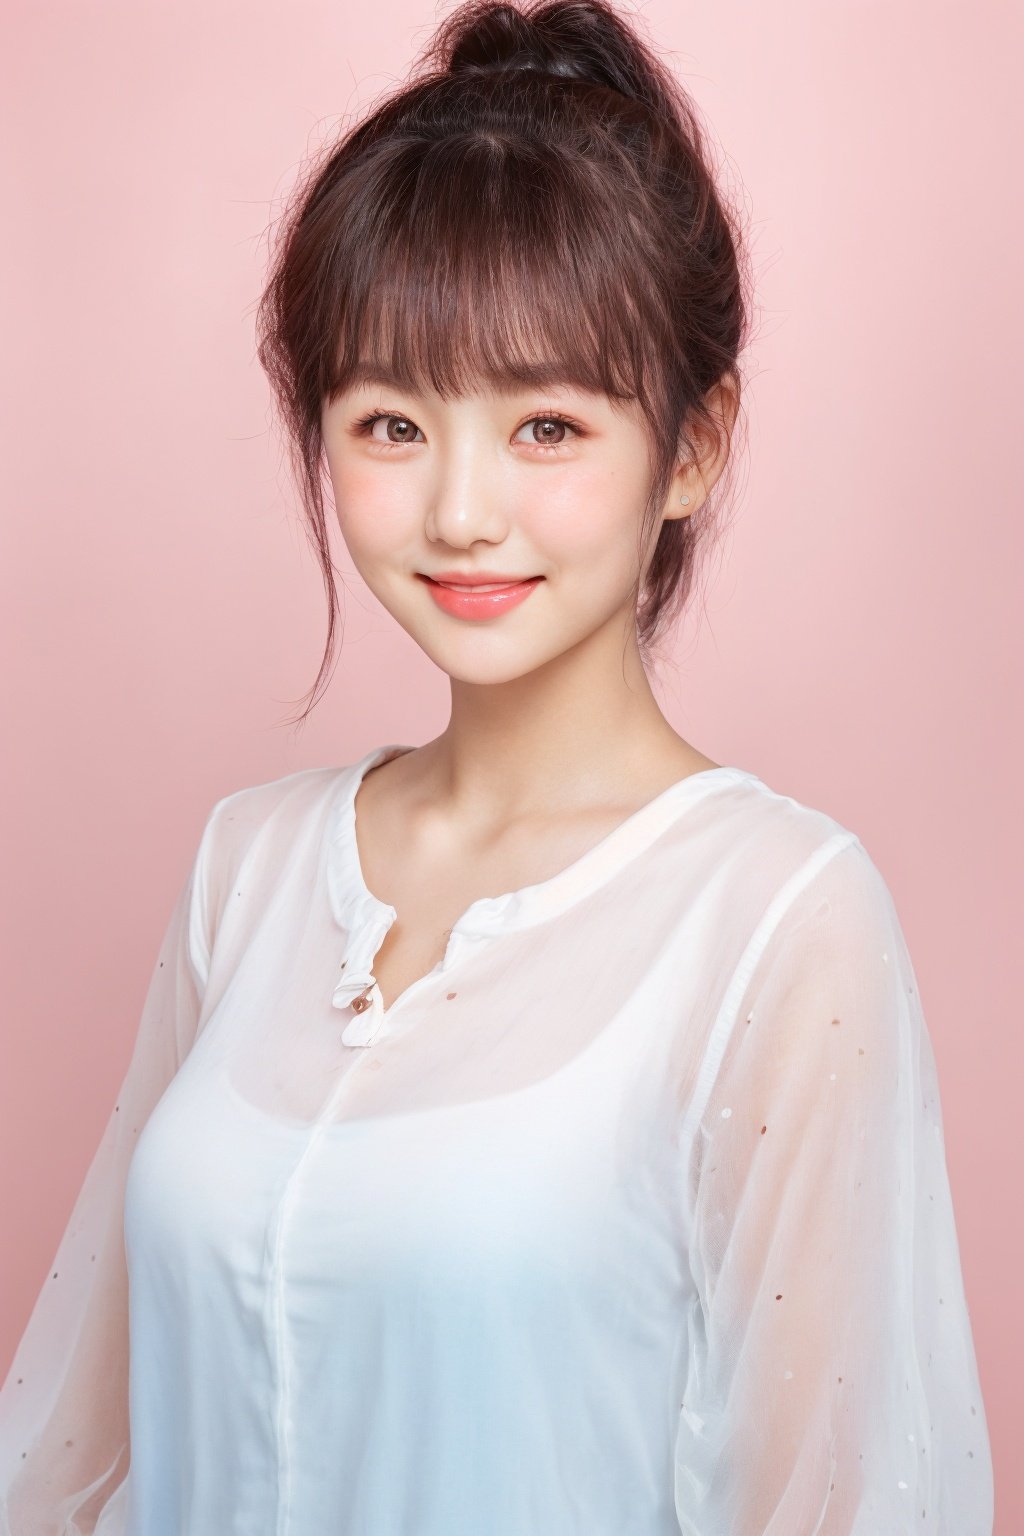 ID photo, (a 5-year-old girl: 1.5), solo, upper body, ponytail, (big watery eyes: 2.0), (chubby face: 1.5), (beauty mole: 1.5), white shirt, peach blossom, tender skin, she smiles at the camera, (pink solid background: 1.5), cute blue_IDphoto